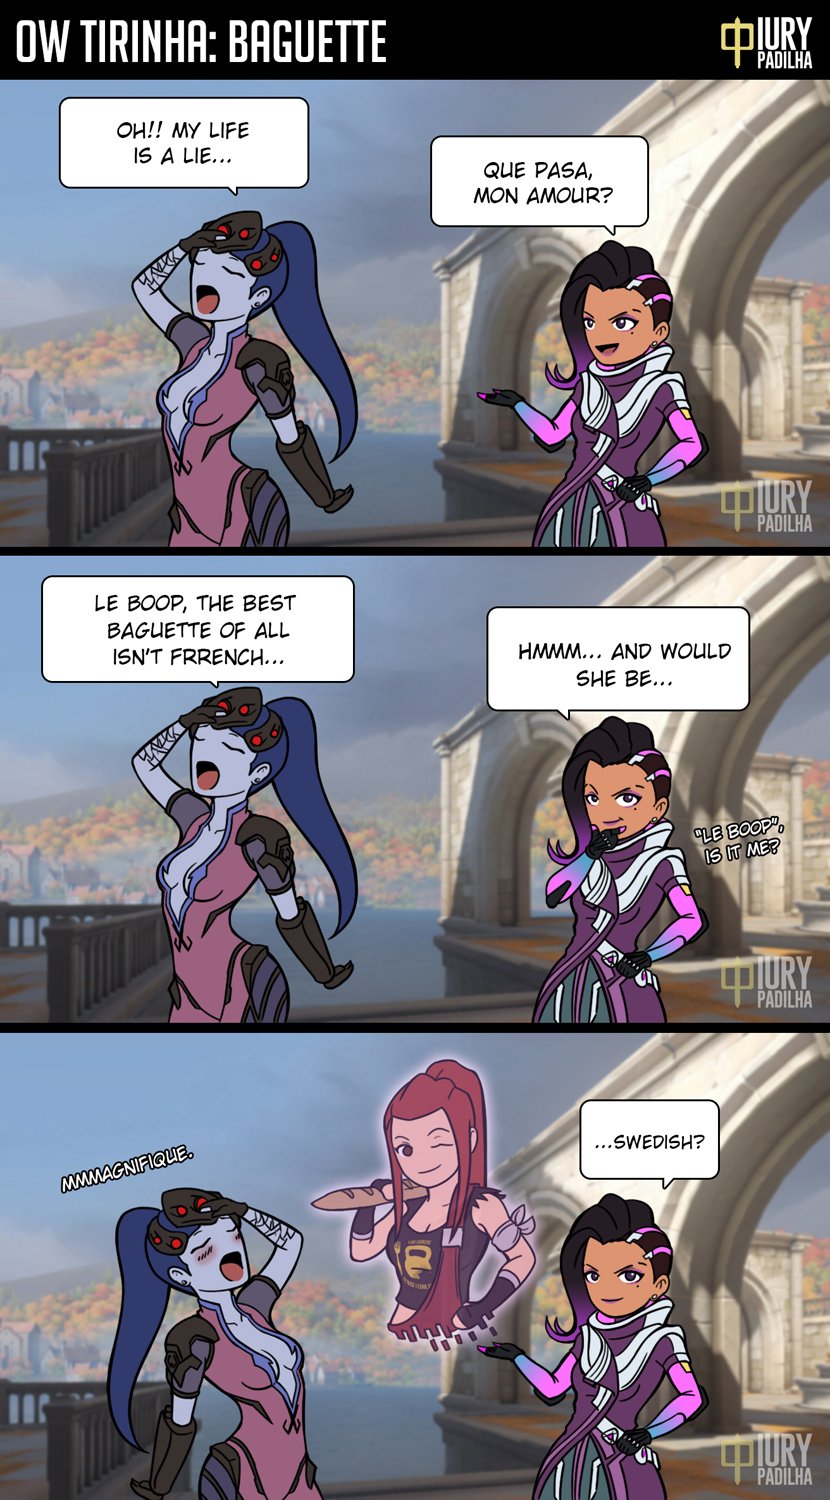 Iury Padilha: Commiss open! (Slots Full) on Twitter: can't deal with this discovery!! 😆😆 #overwatch #widowmaker #sombra #BAGUETTE / Twitter